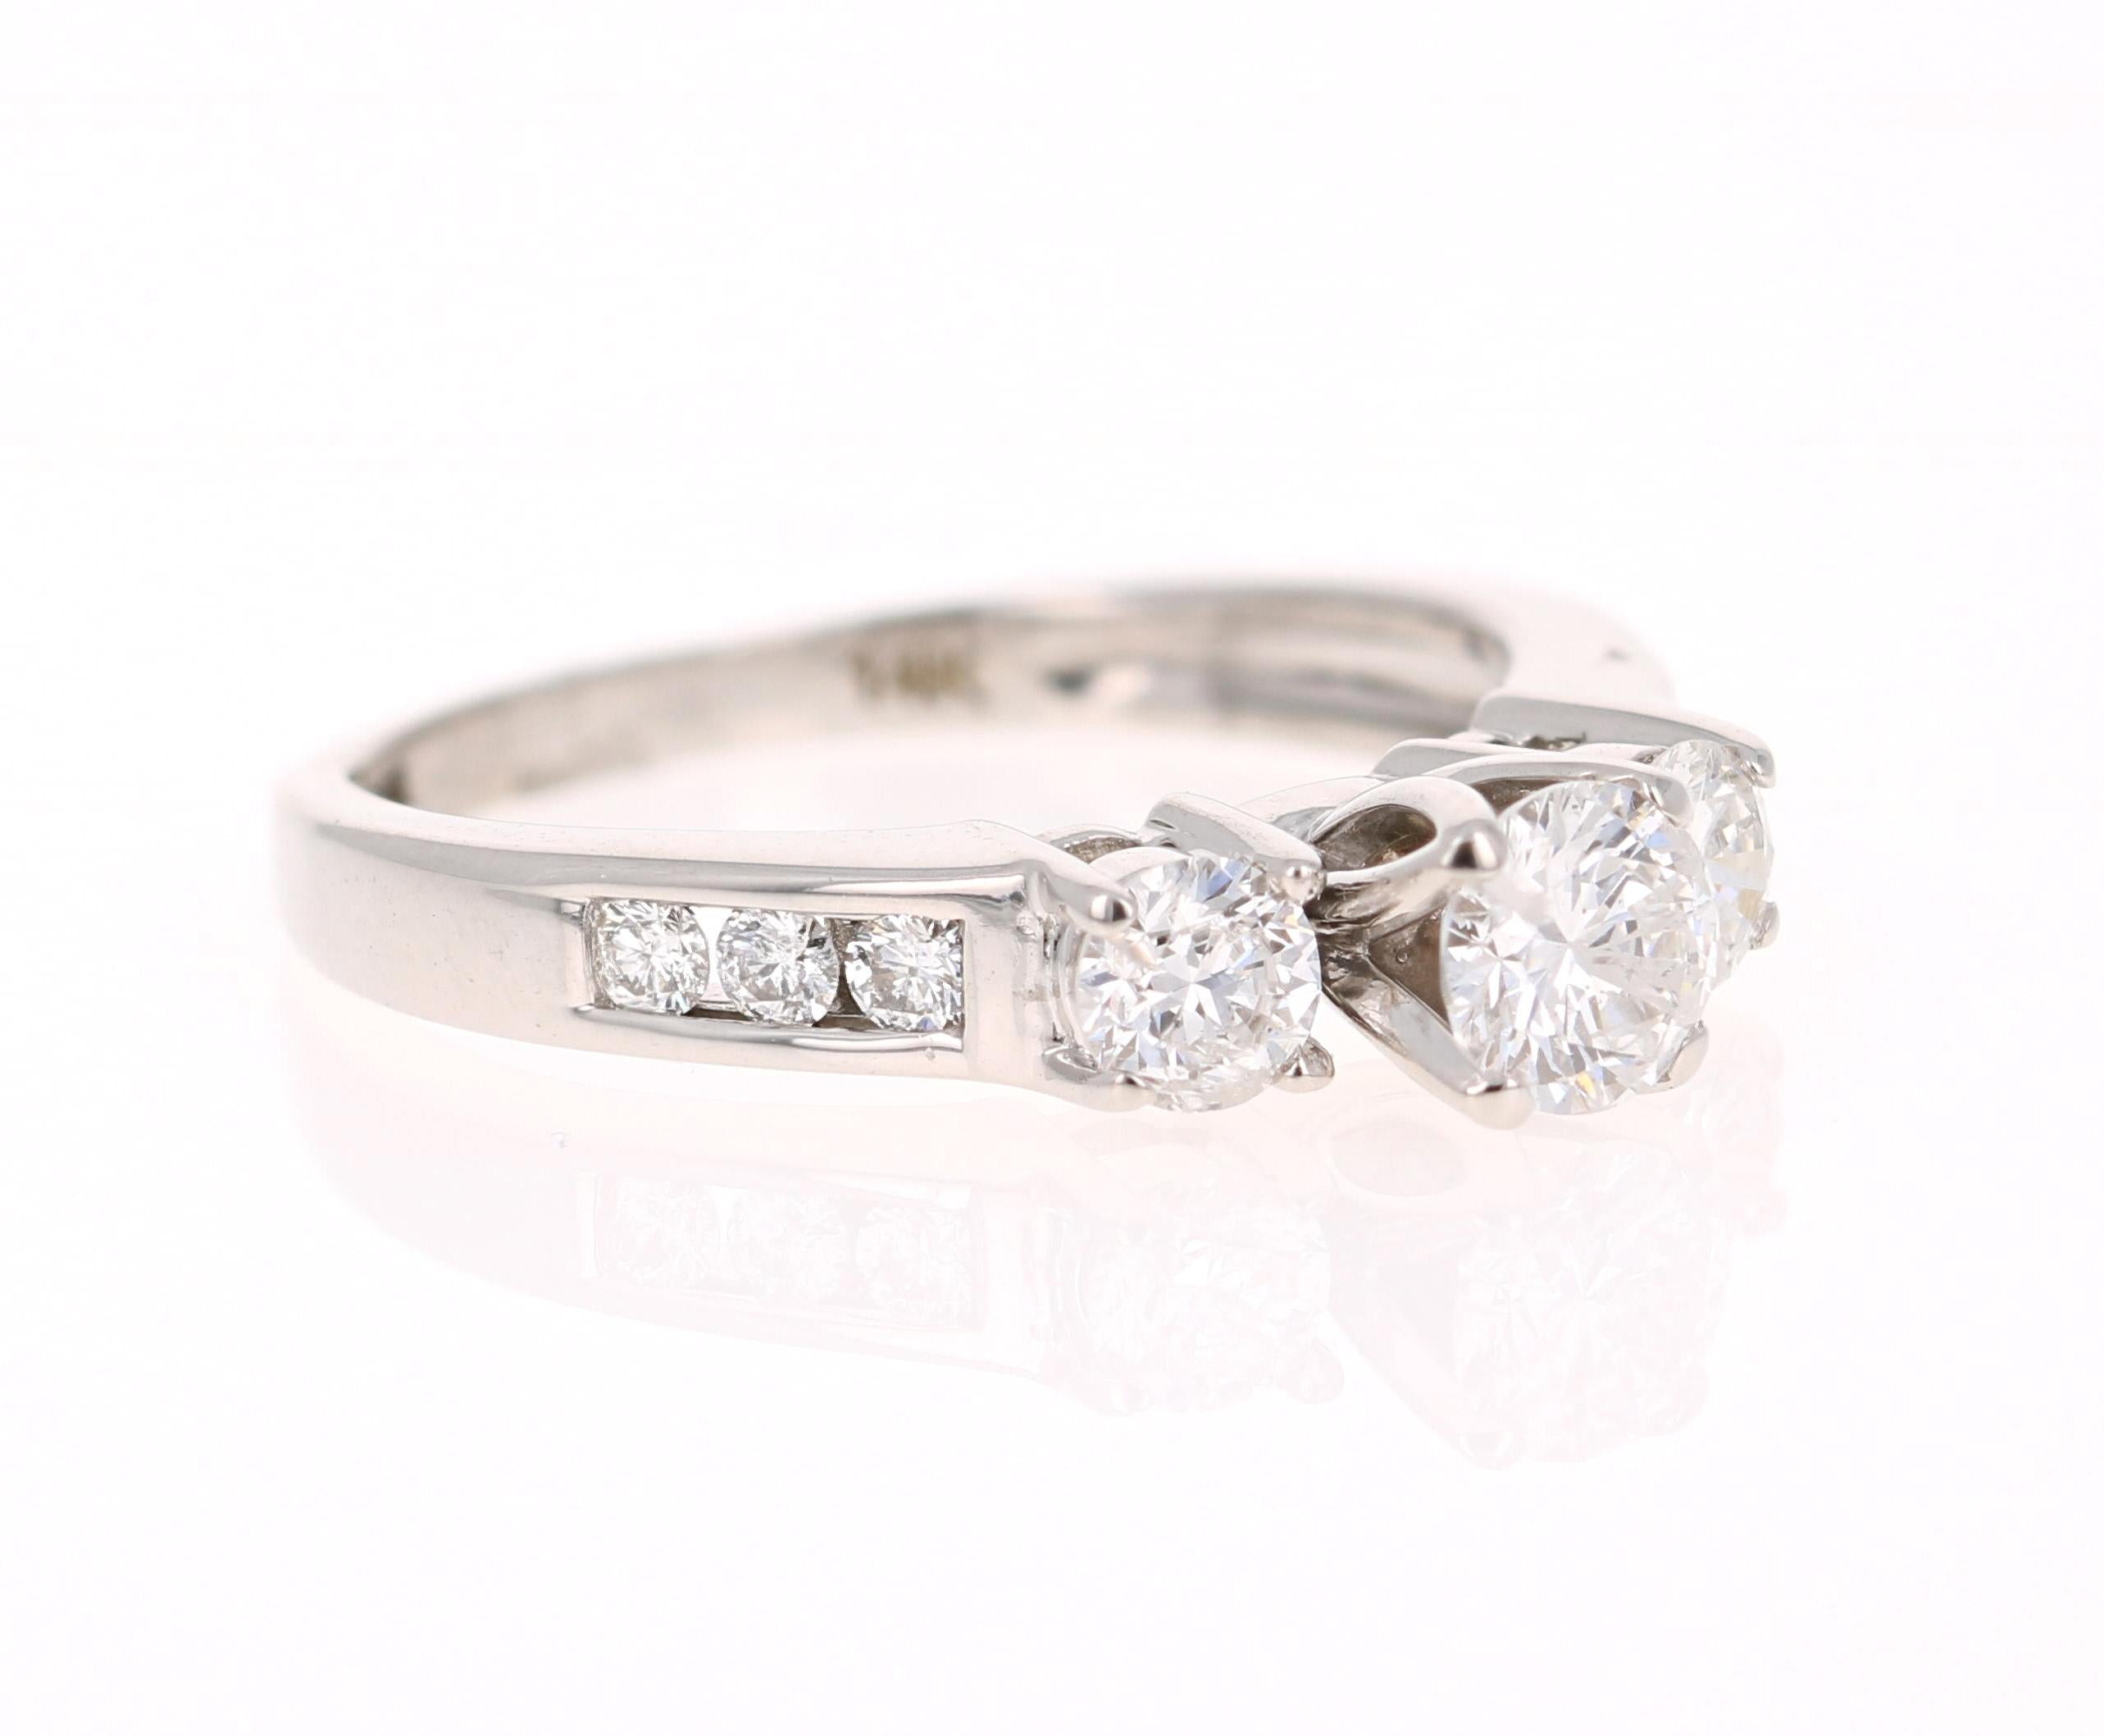 A classic 3-stone Diamond ring set in 14 Karat White Gold. A beautiful promise, engagement or wedding ring. 

There are 9 Round Cut Diamonds that weigh 1.00 Carat. (SI-F)

It is set in 14K White Gold and weighs approximately 3.8 grams.
 
The ring is